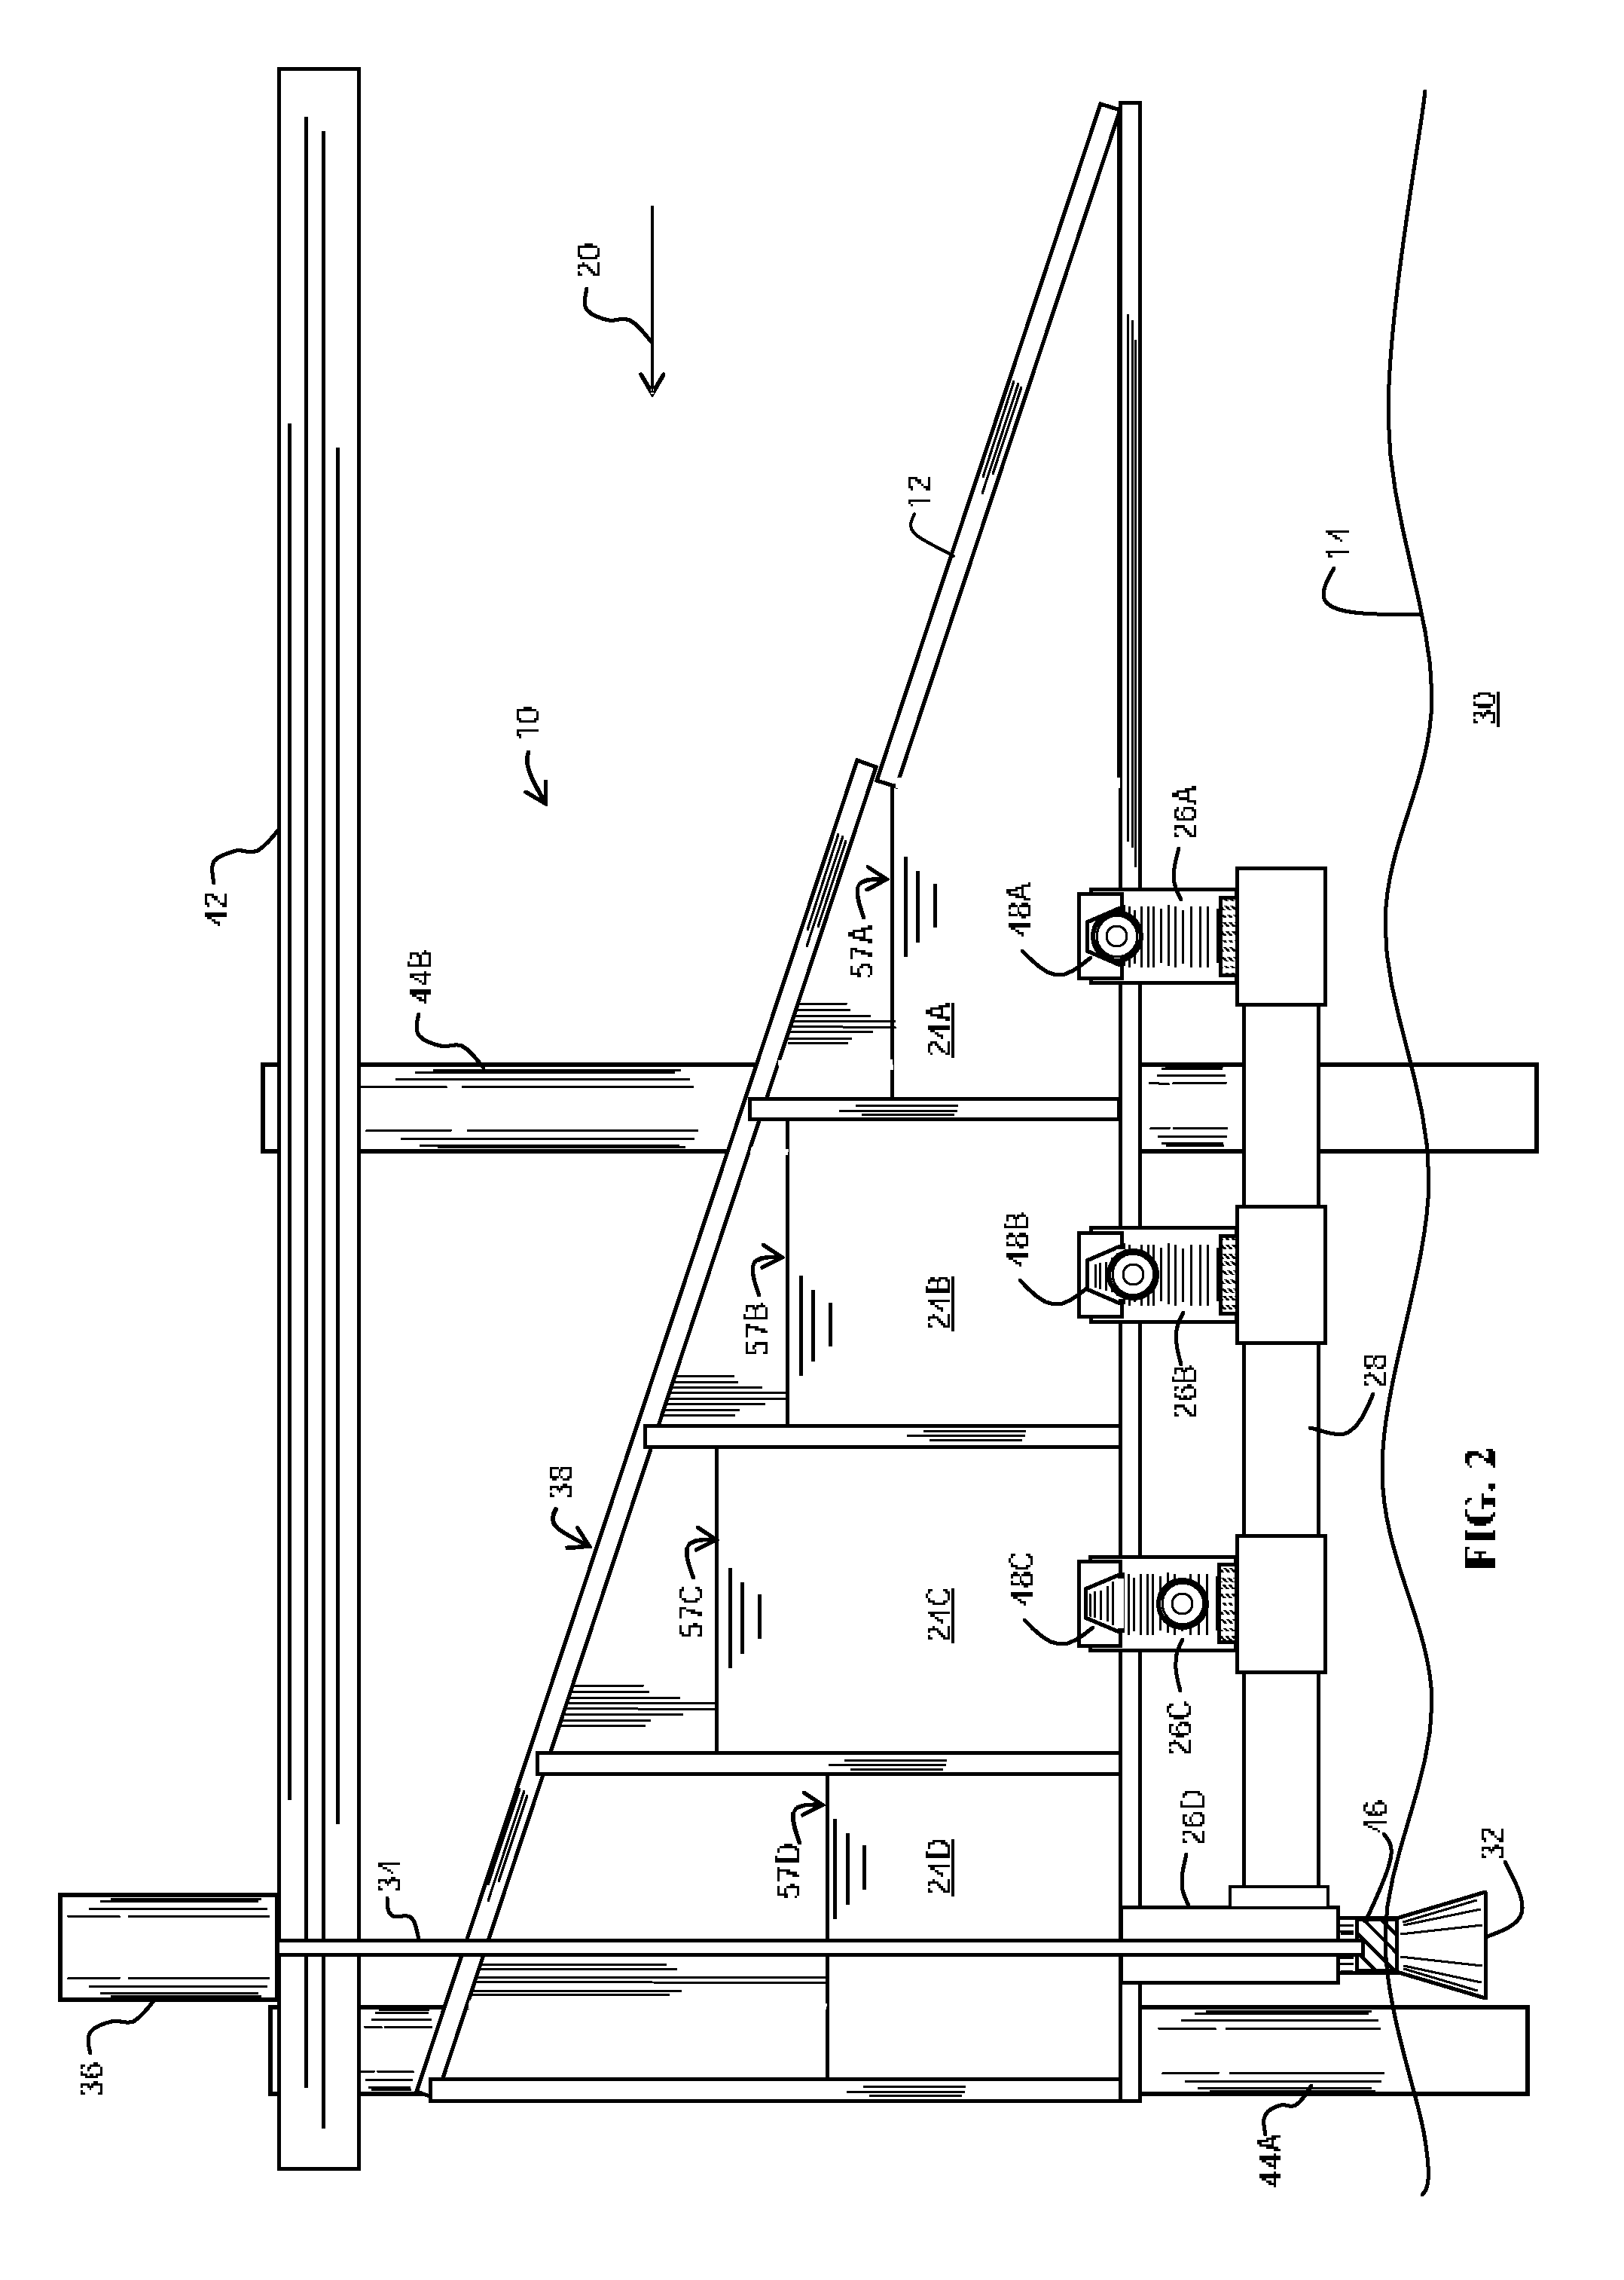 Flow power converter apparatus employing a flow-controlled duct to capture flow energy